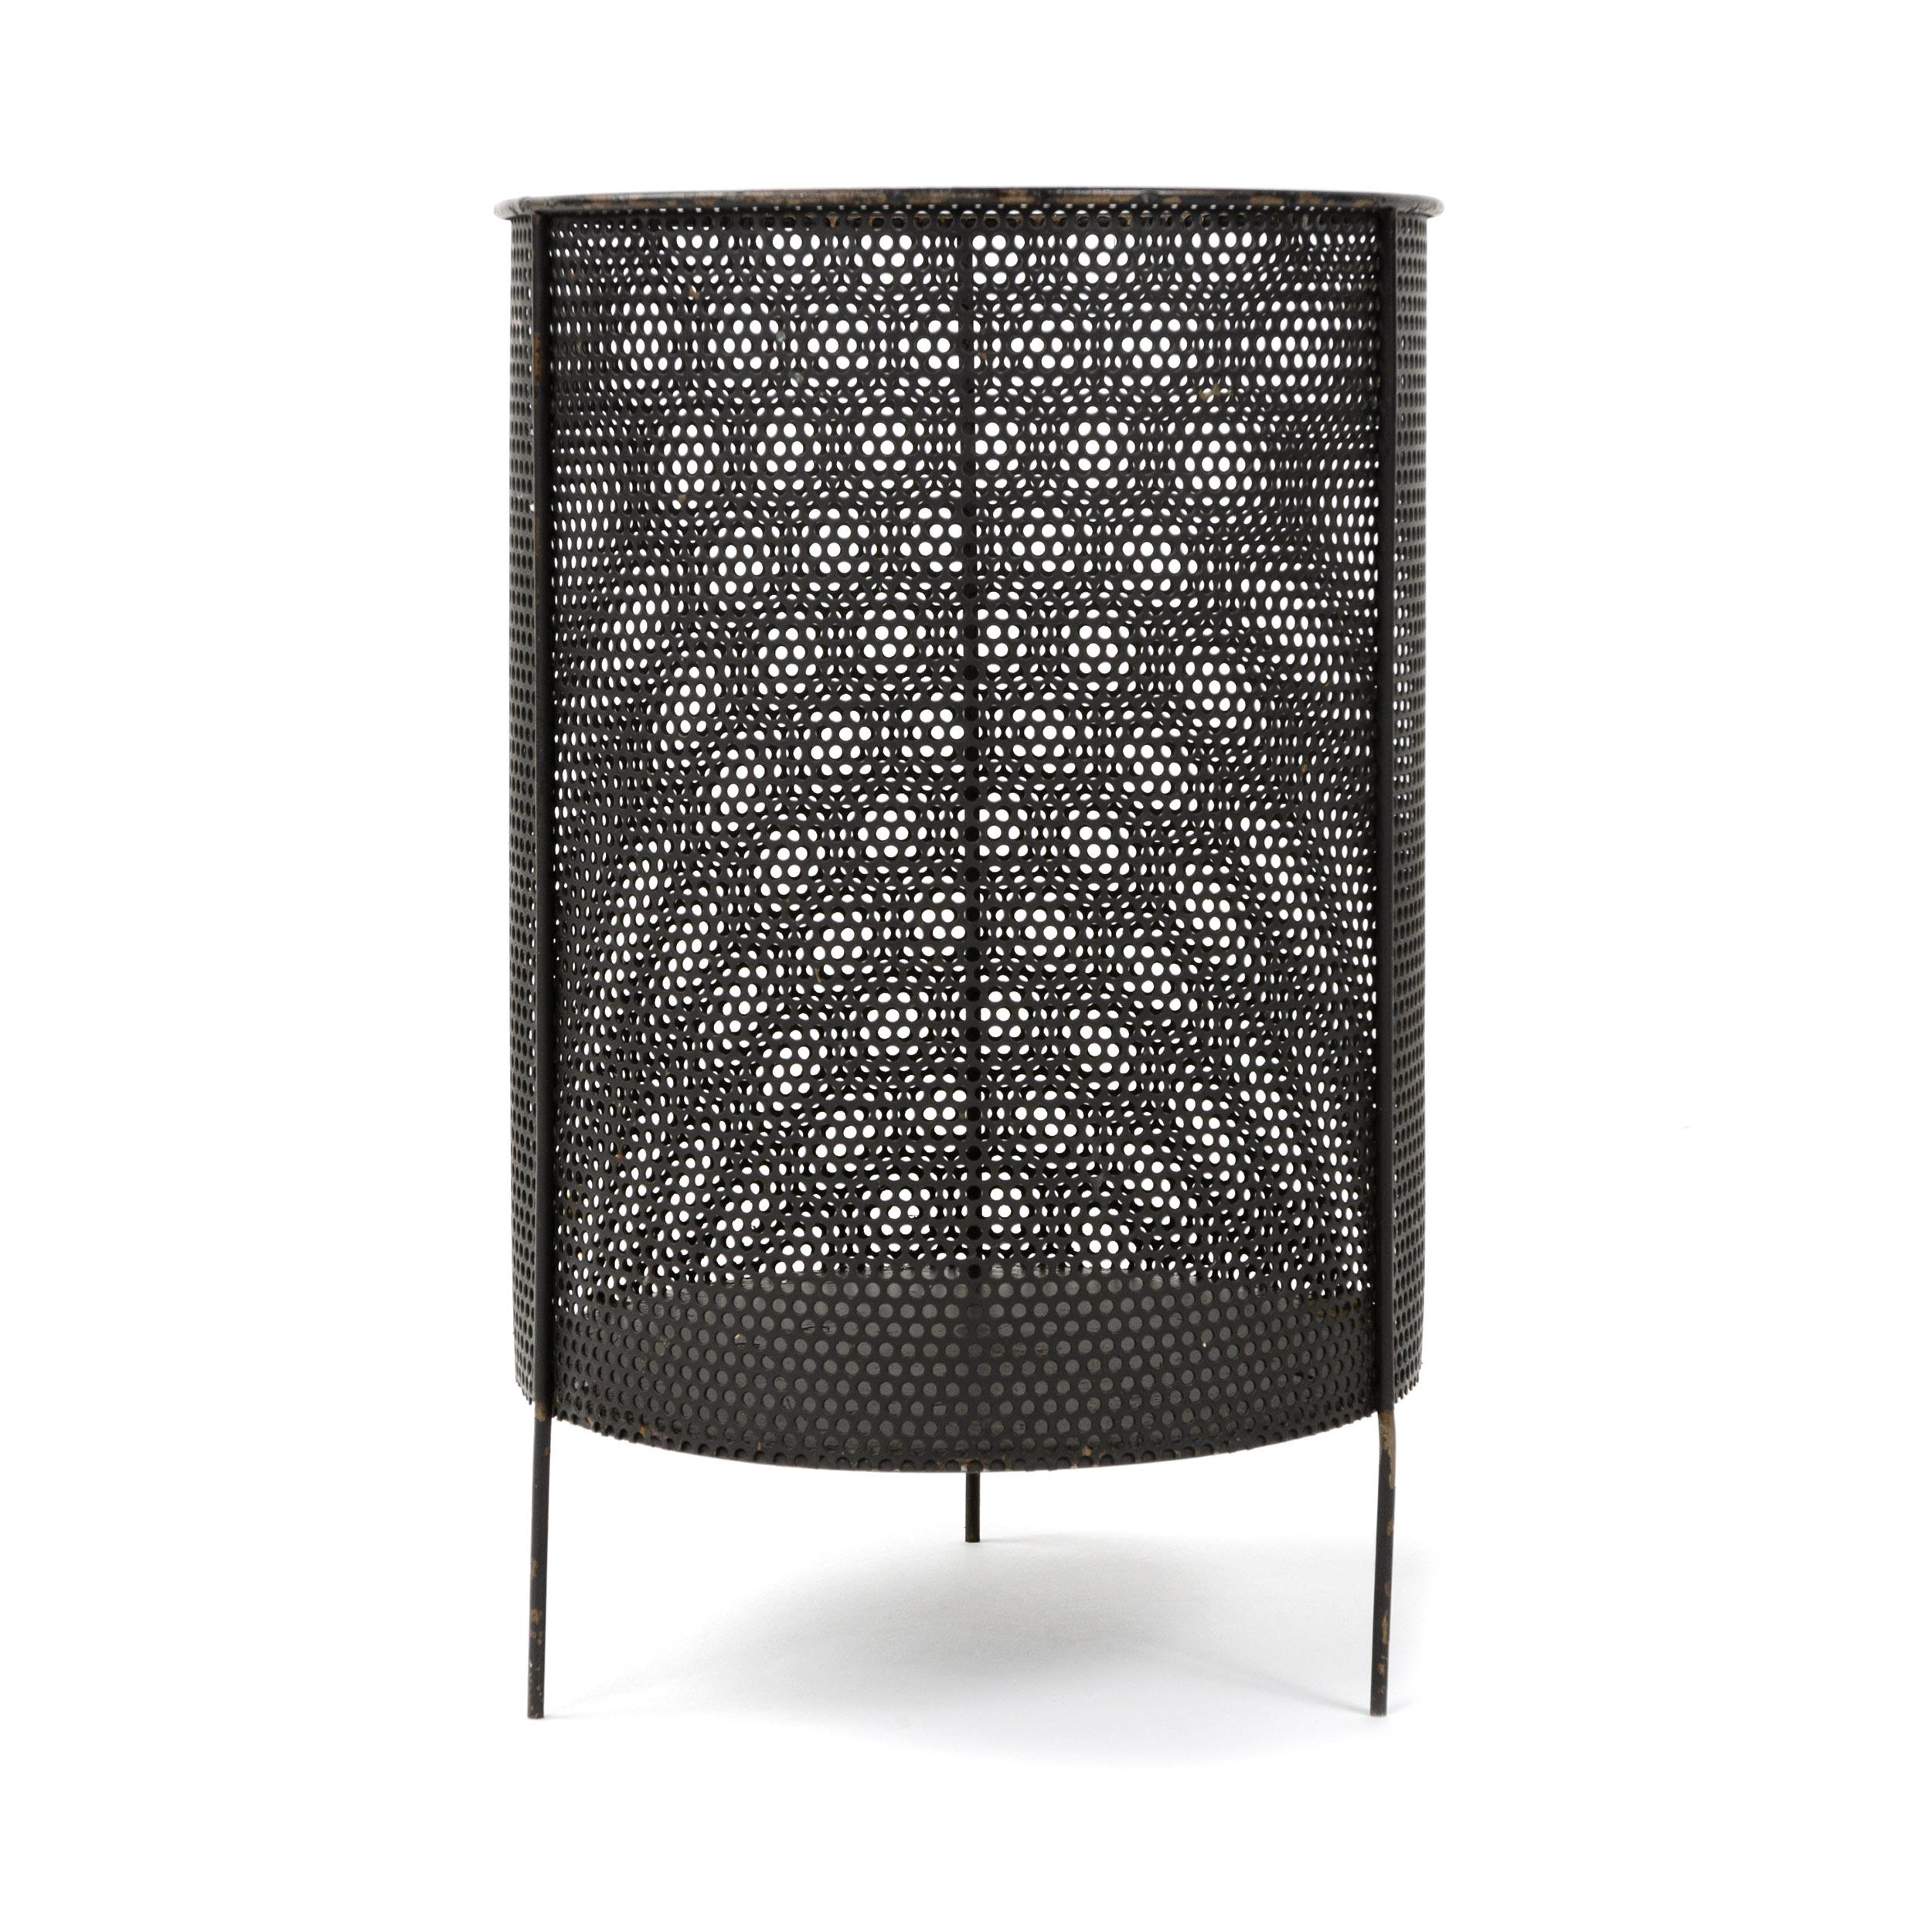 A perforated steel wastebasket on three legs designed by Mathieu Mategot. Made in France, circa 1950s.